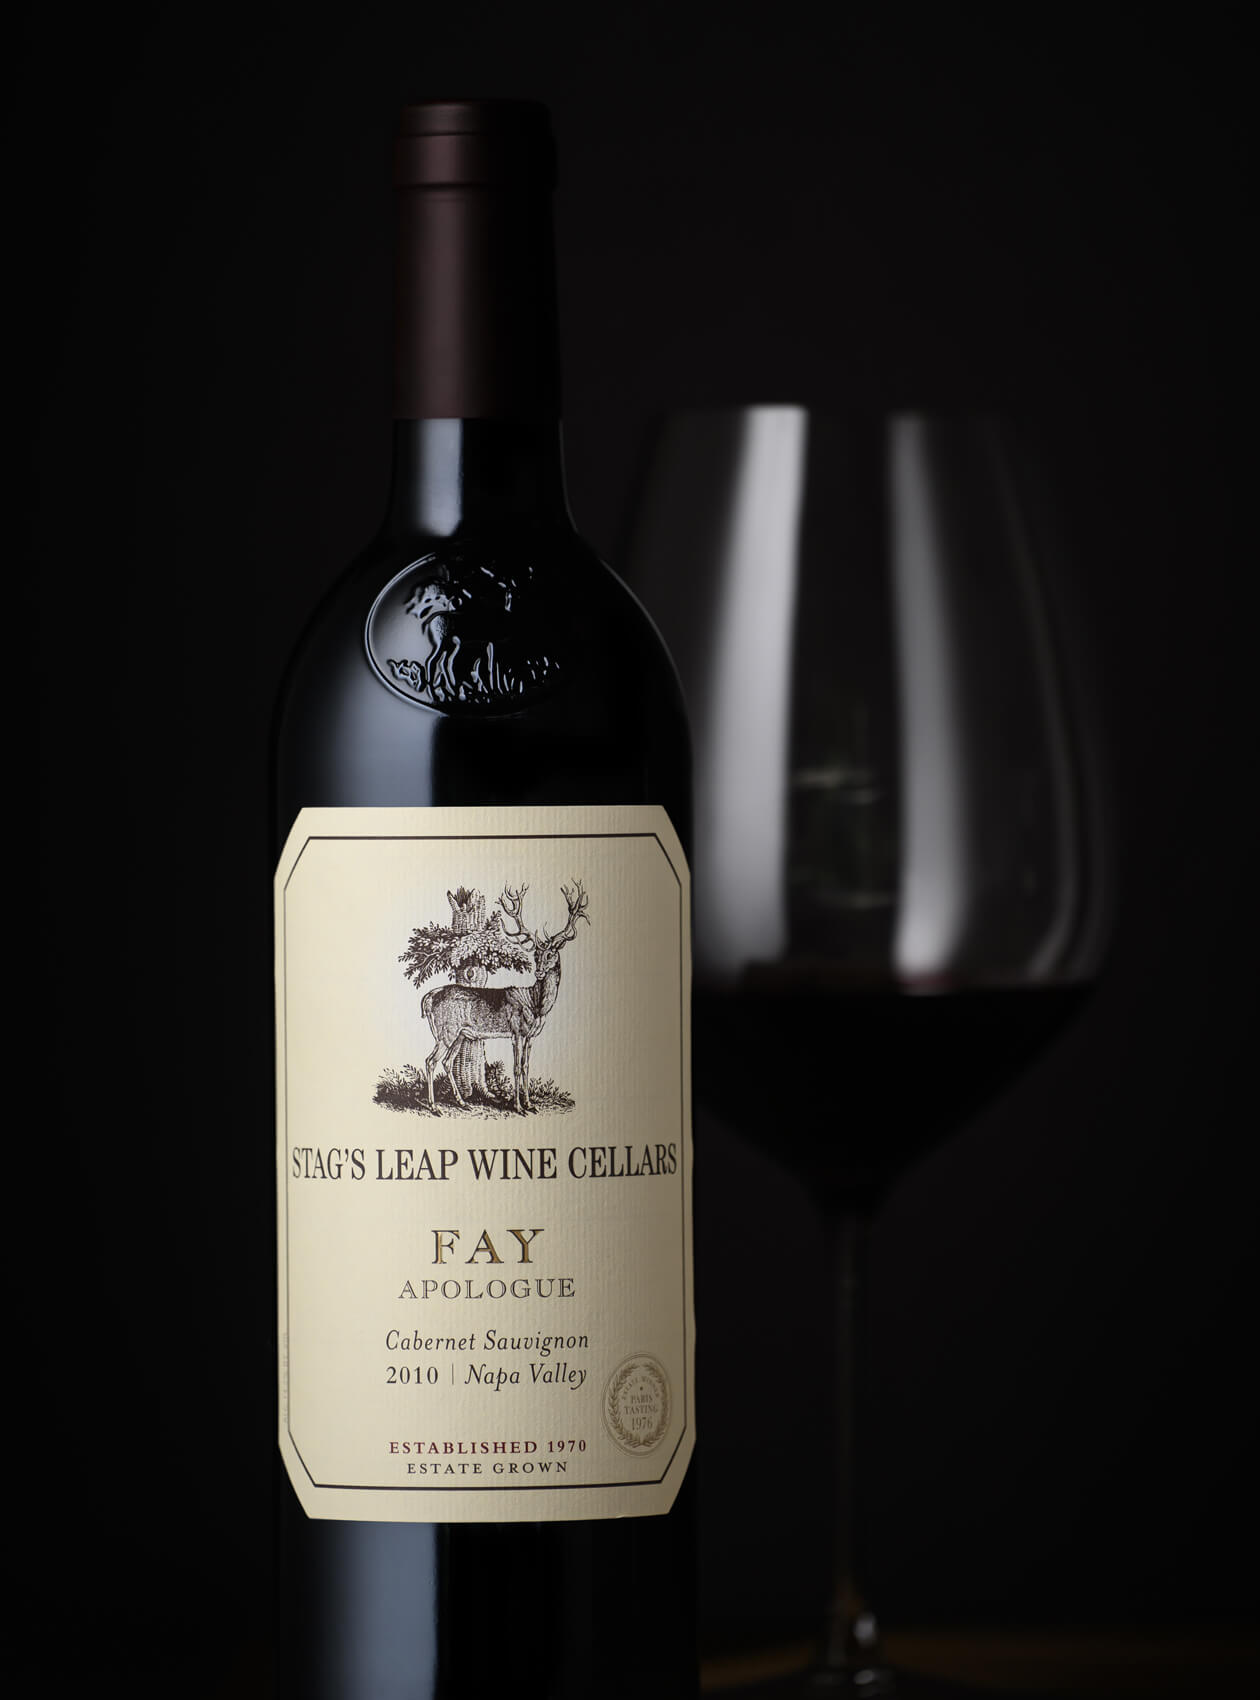 Bottle of Stag's Leap Wine Cellars 2010 FAY APOLOGUE Cabernet Sauvignon red wine.